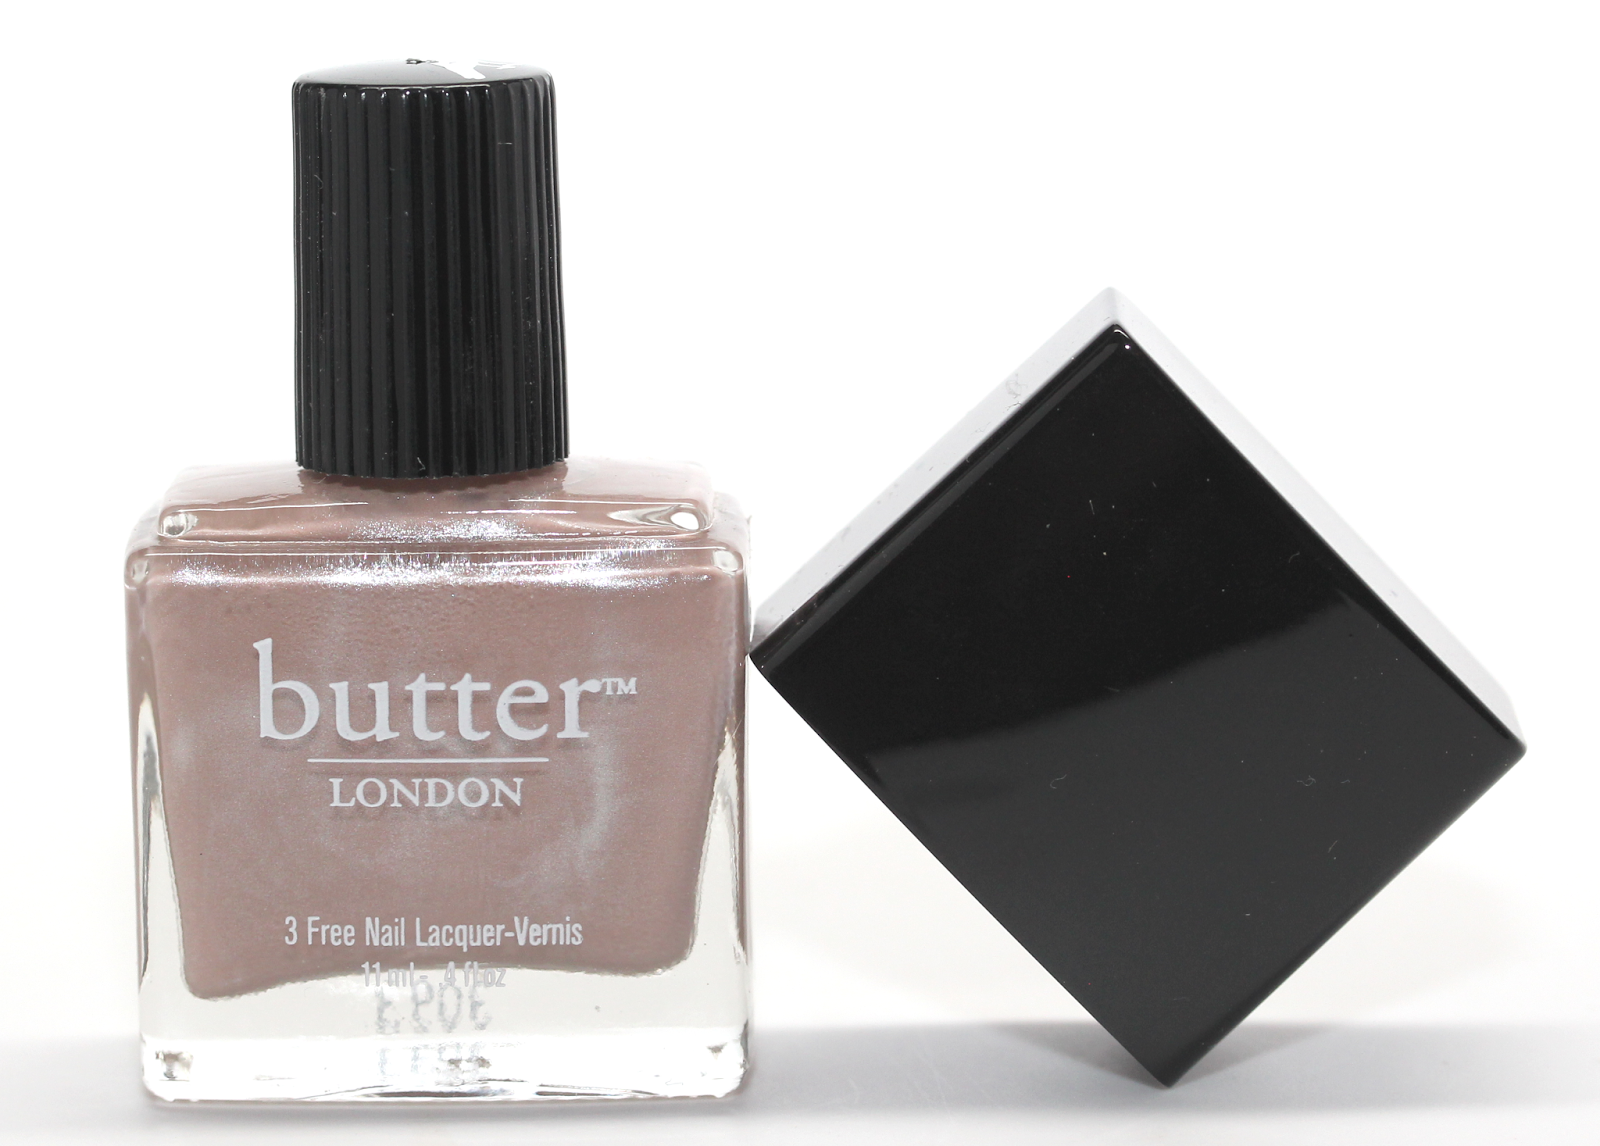 6. Butter London Nail Lacquer in "Yummy Mummy" - wide 2